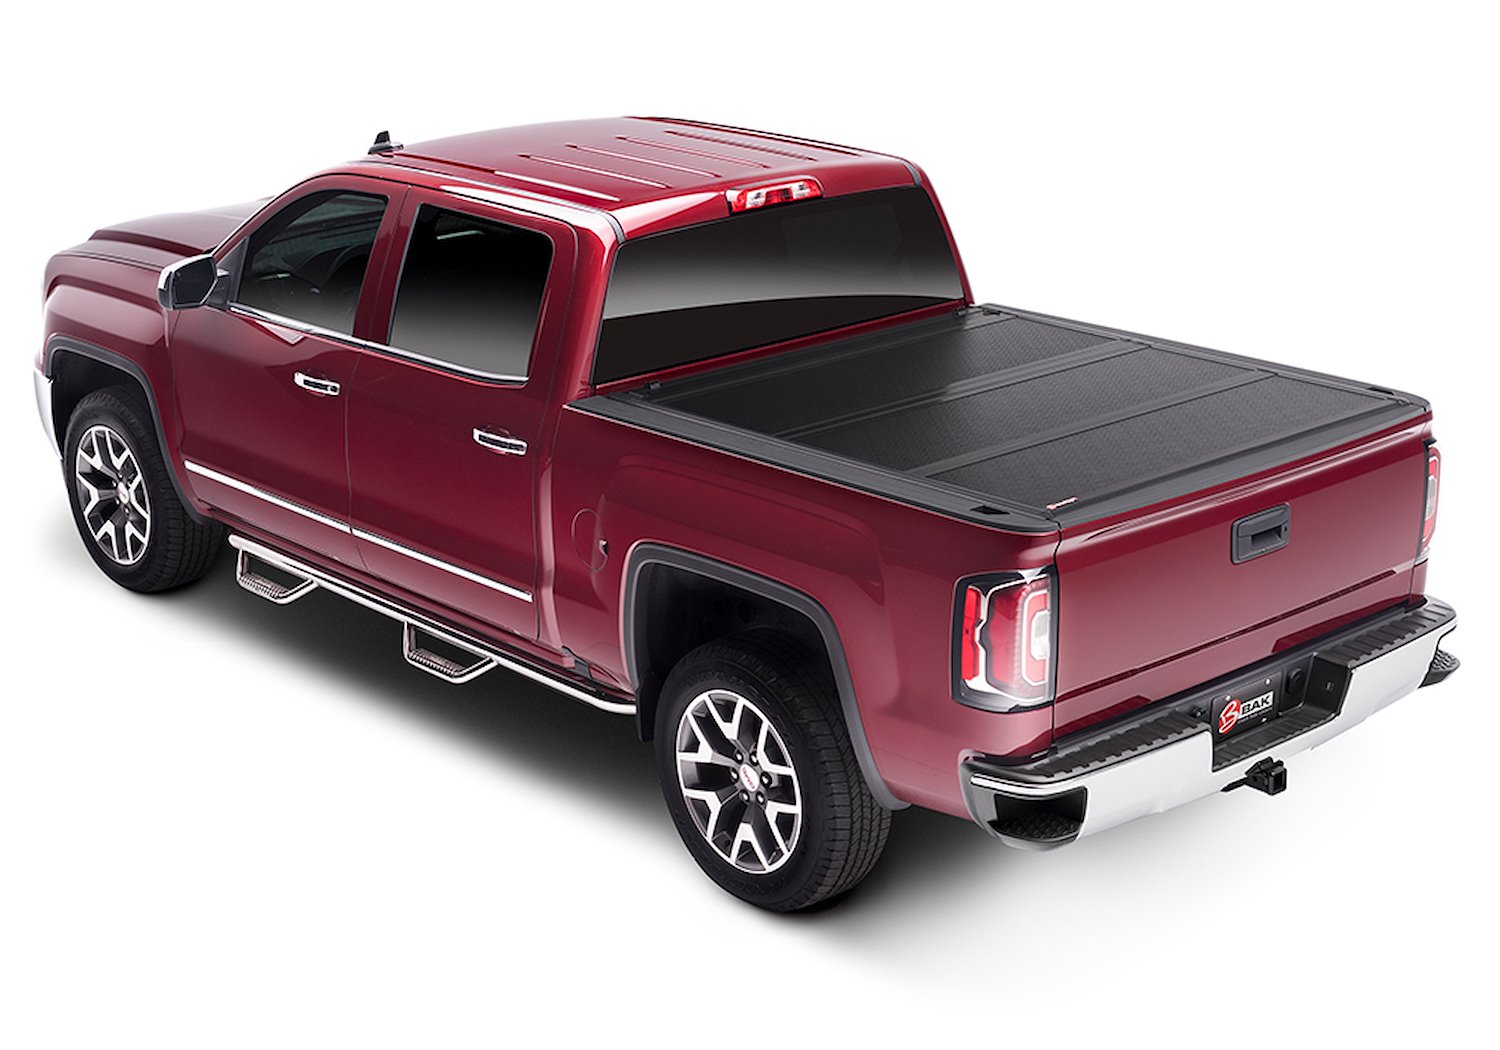 BAKFlip FiberMax Tonneau Cover Fits Select Dodge Ram with Ram Box (New Body Style), Bed Length: 5.7 ft.